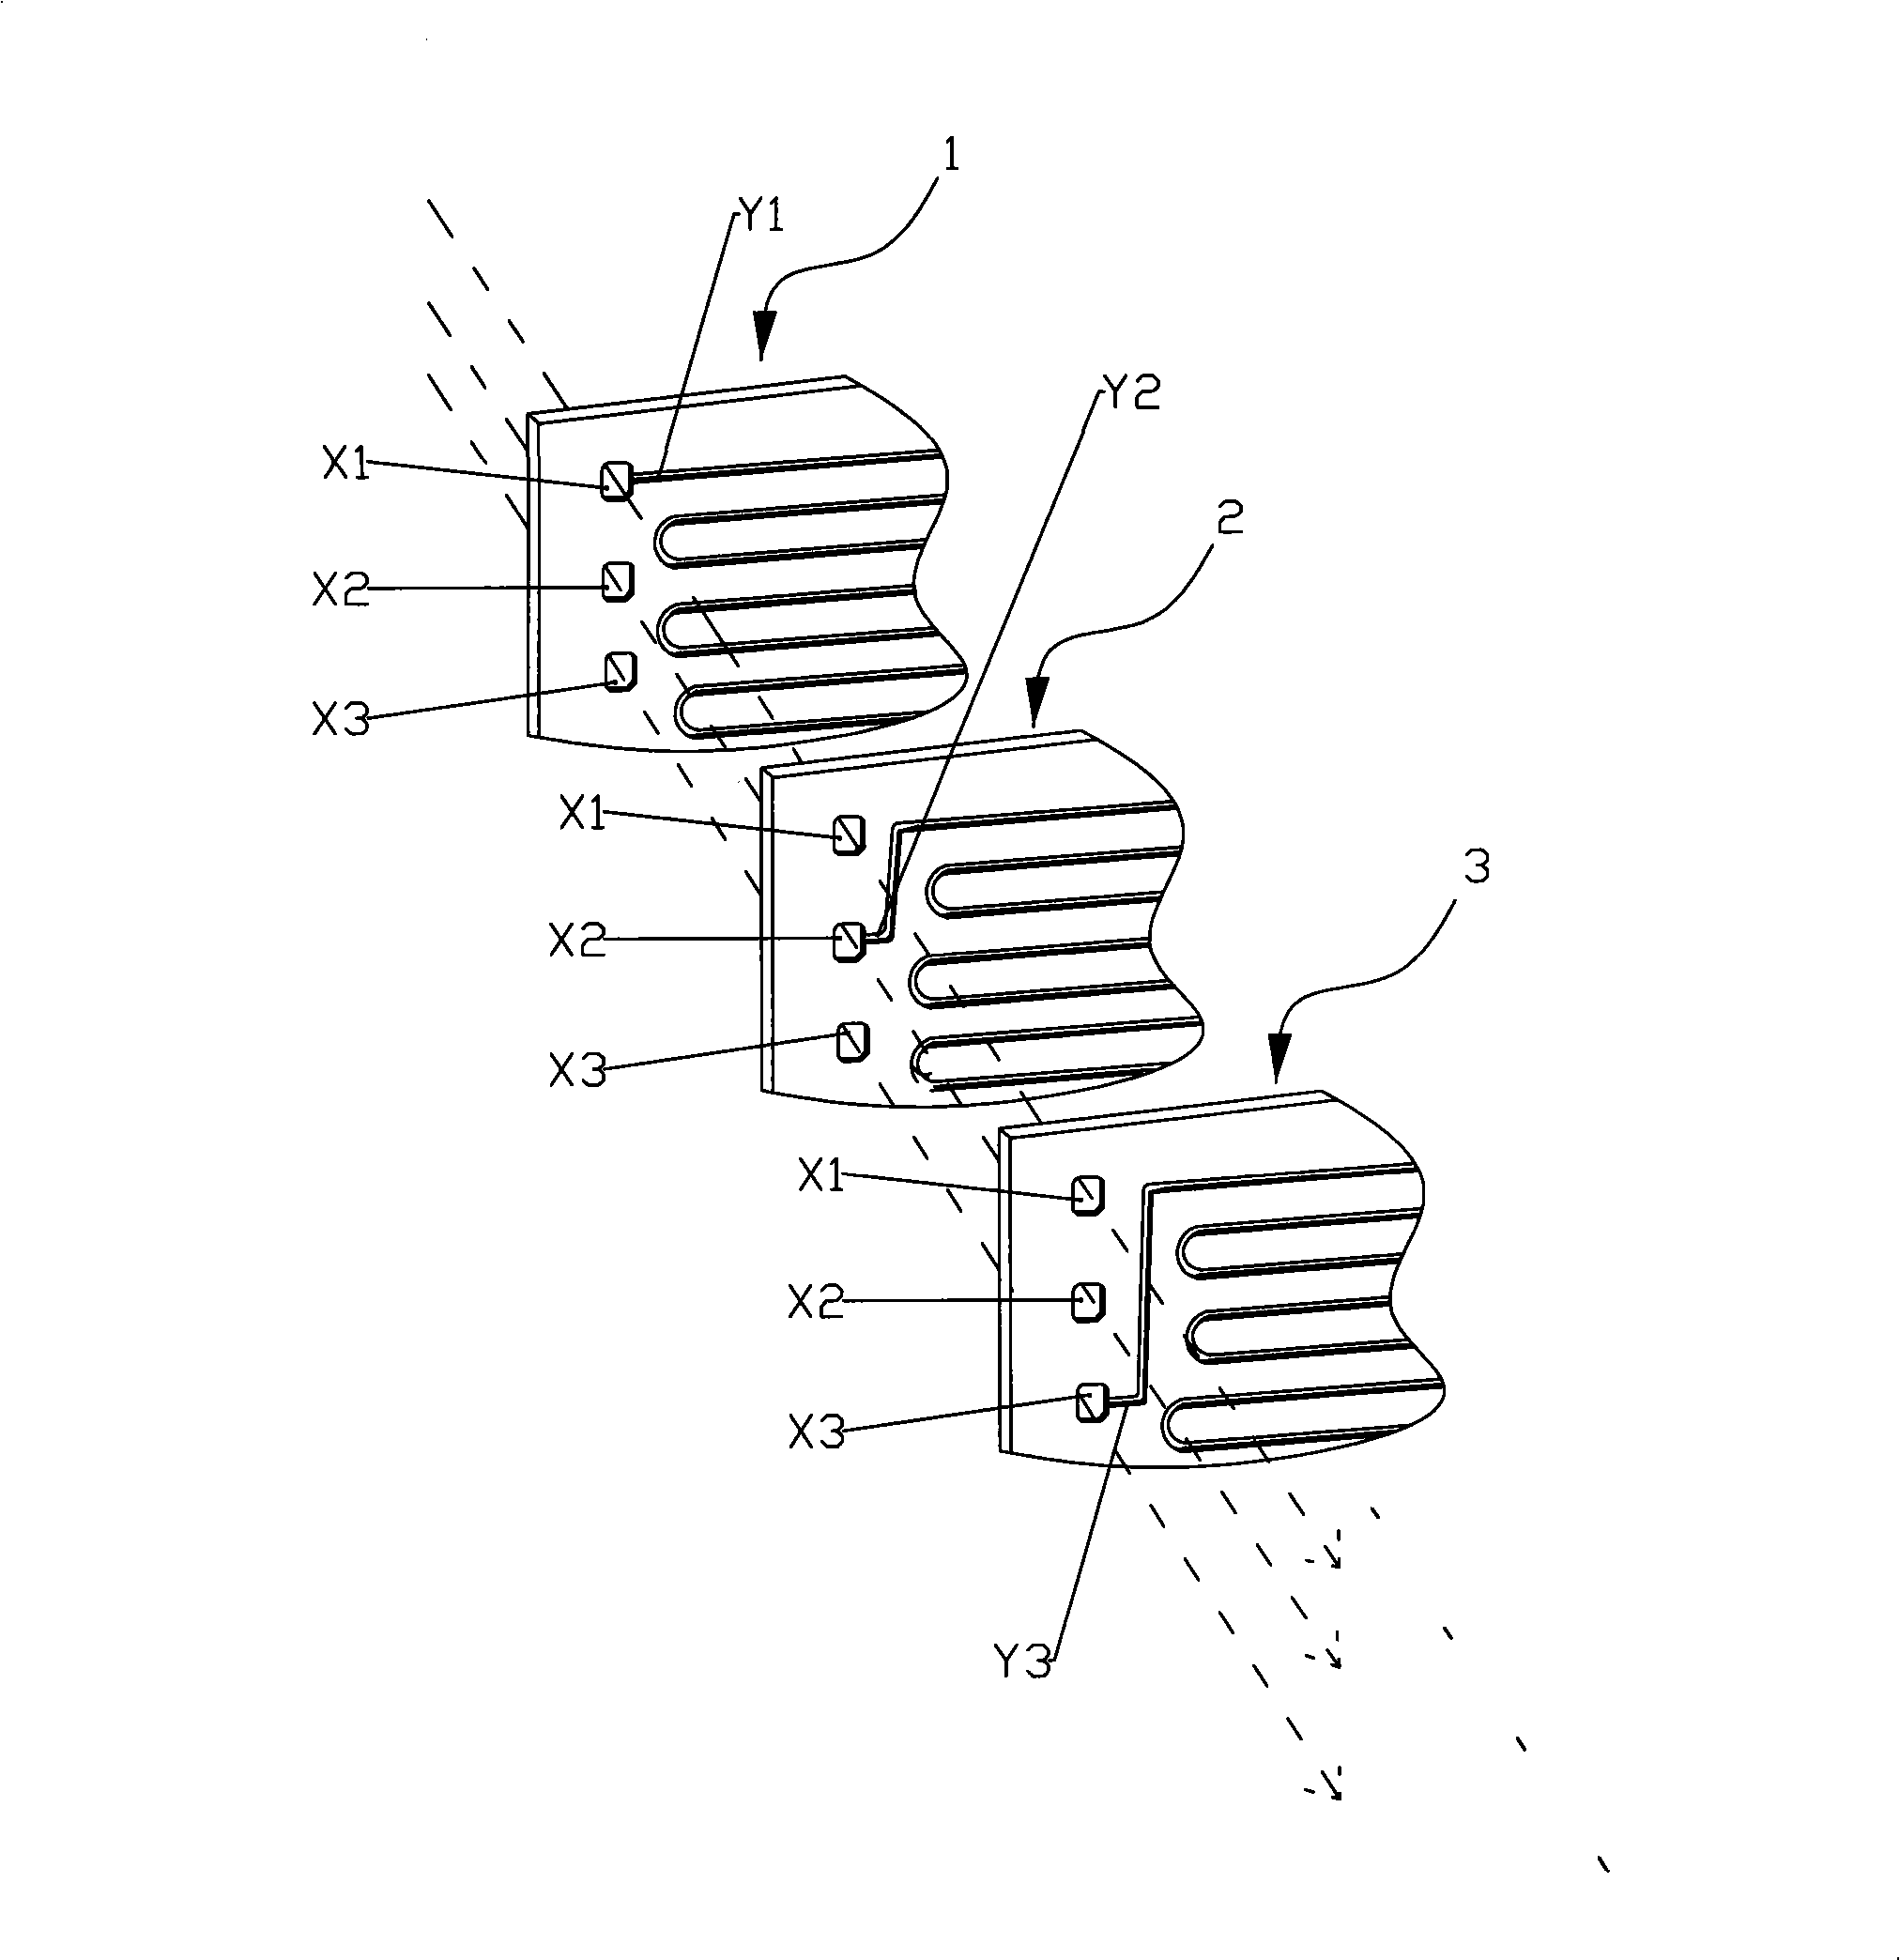 Gas flow passage structural of fuel batter with proton exchange film